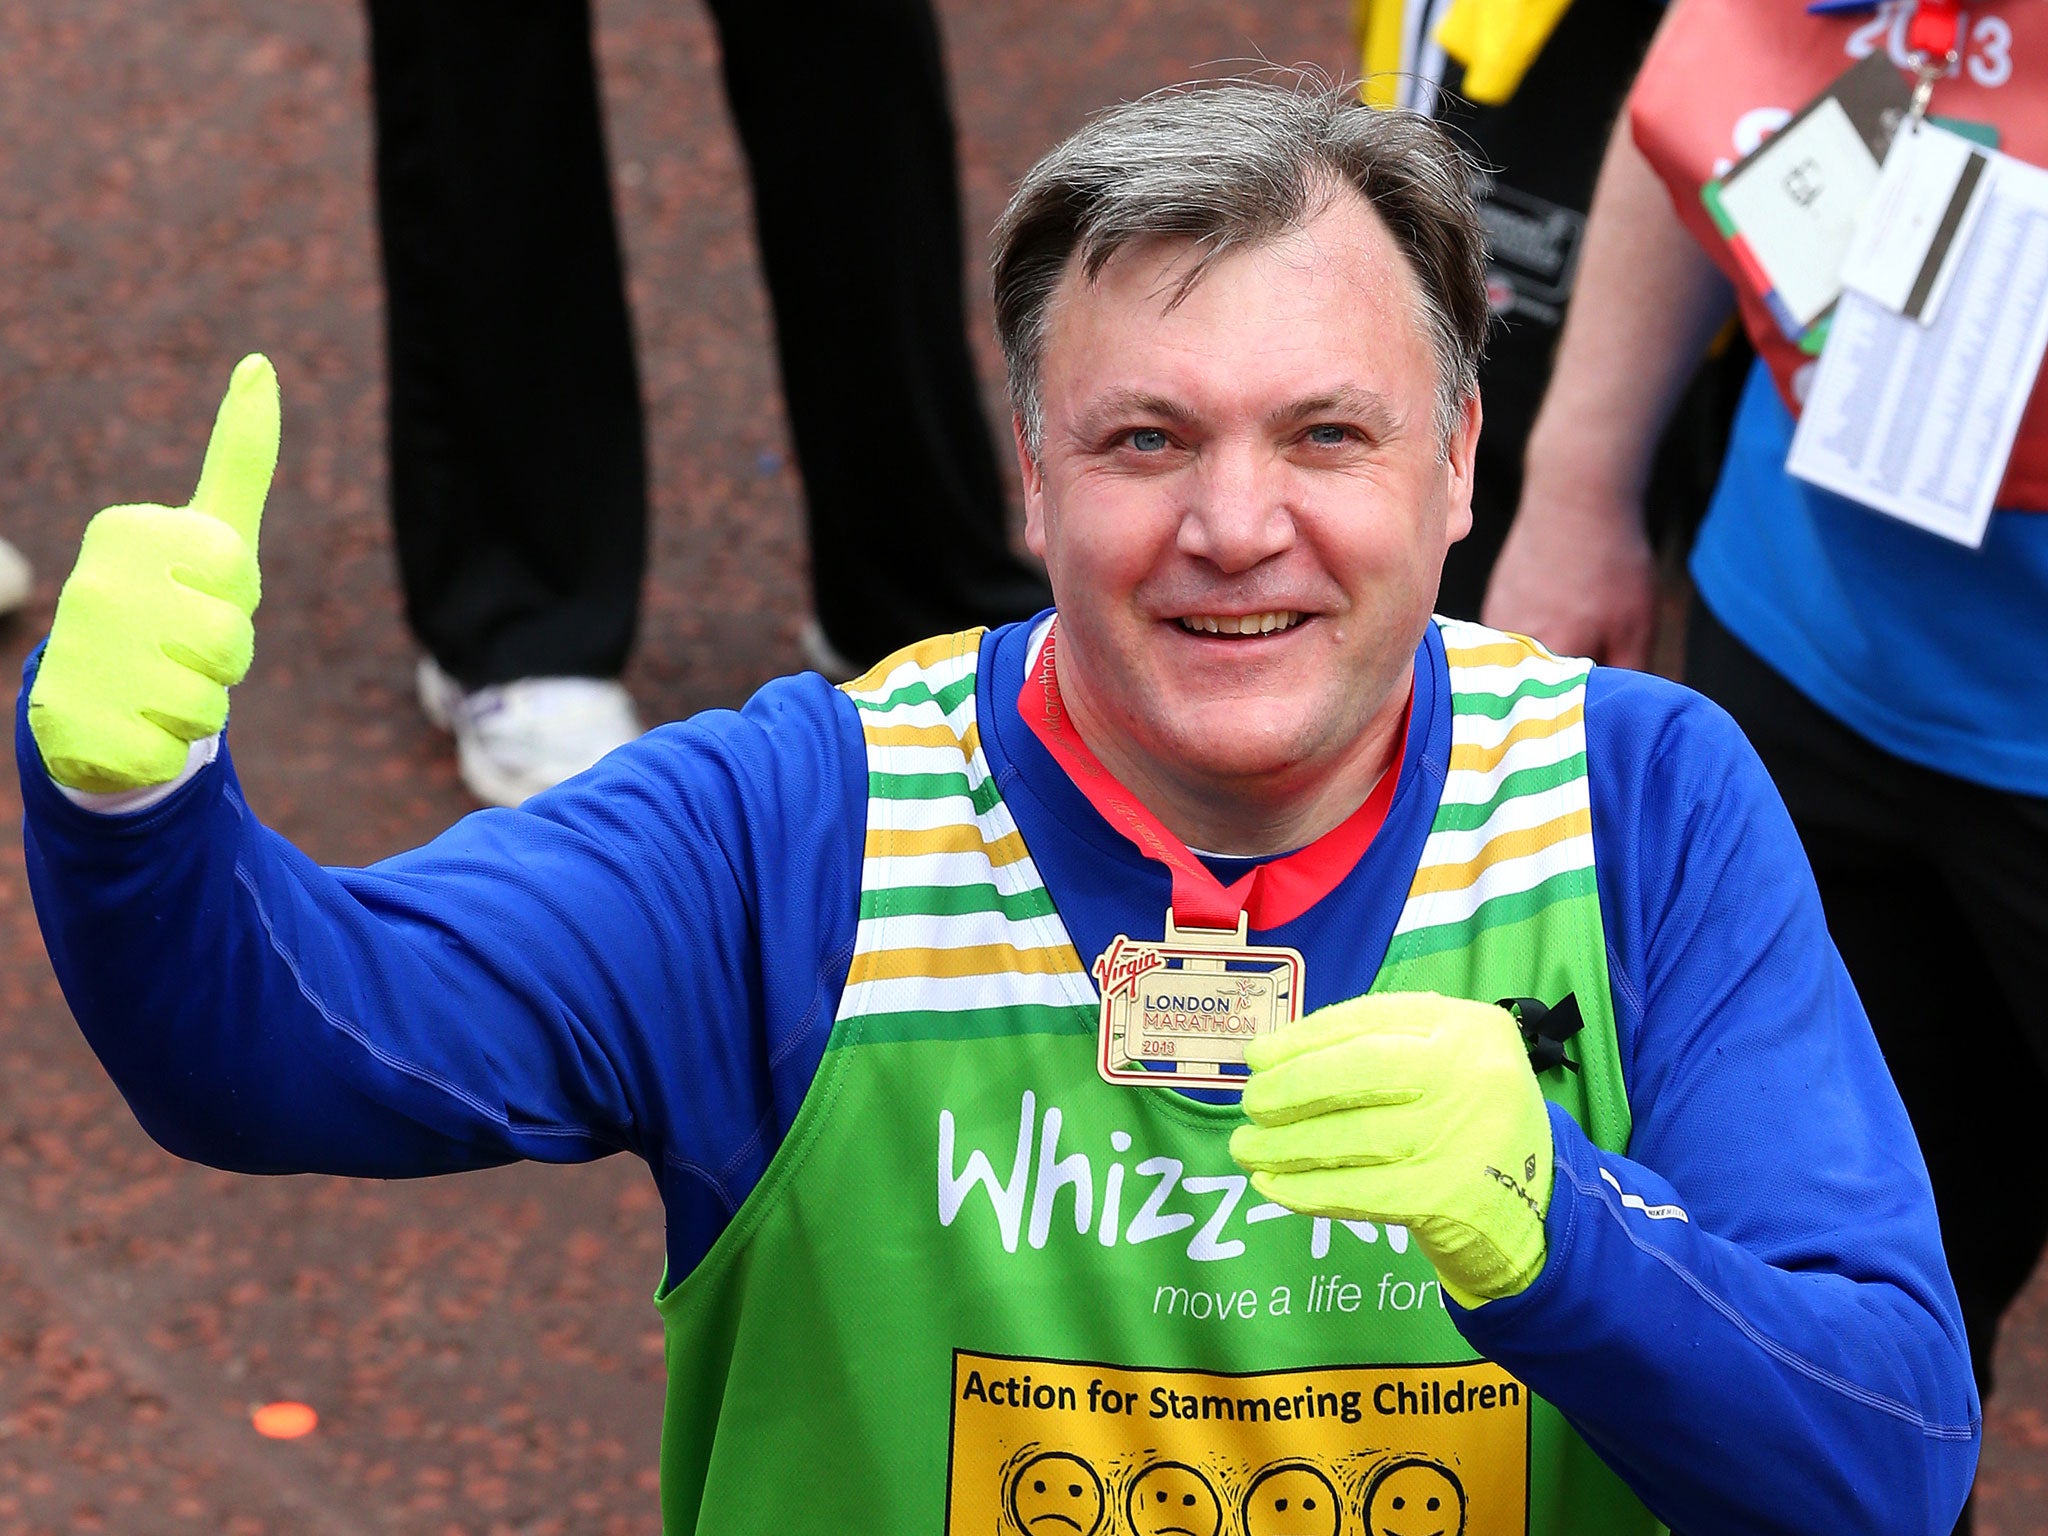 Labour MP and Shadow Chancellor Ed Balls gives a thumbs up as he poses with his medal after the Virgin London Marathon 2013.